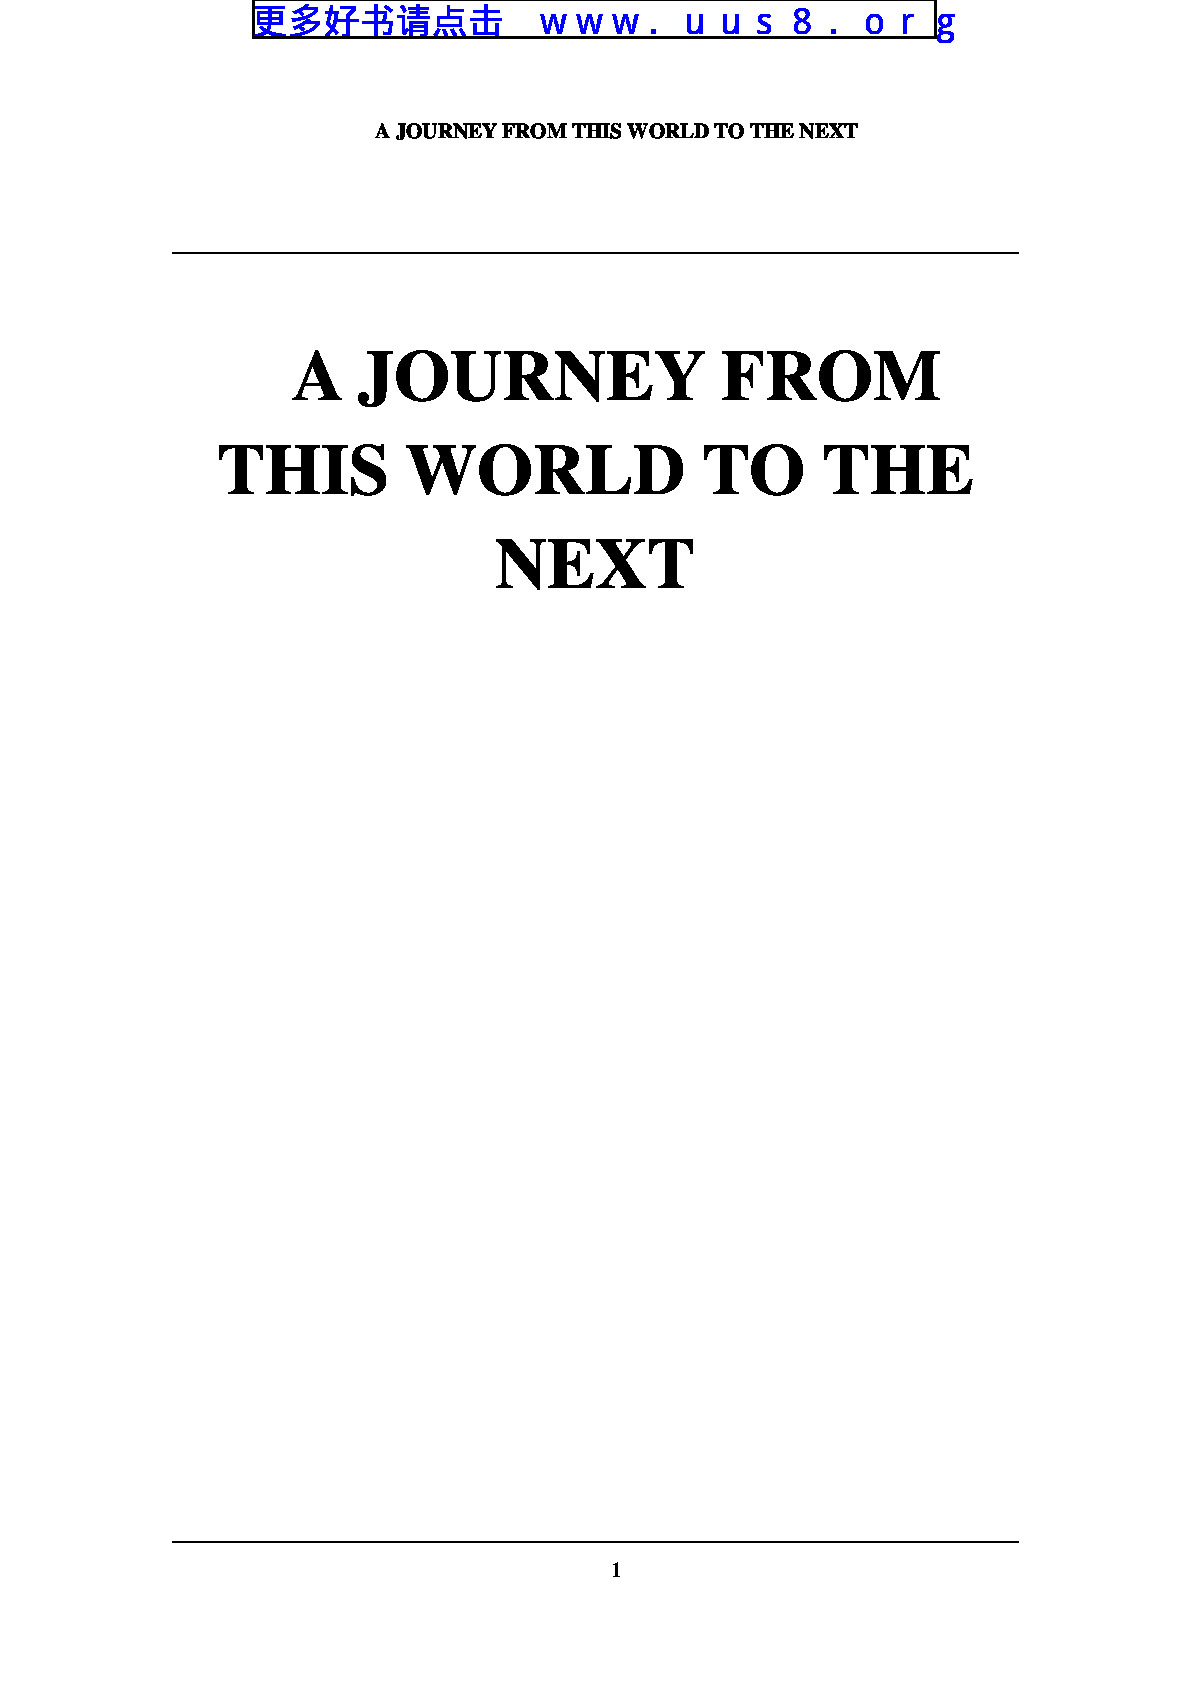 a_journey_from_this_world_to_the_next(从这个世界到下个世界)